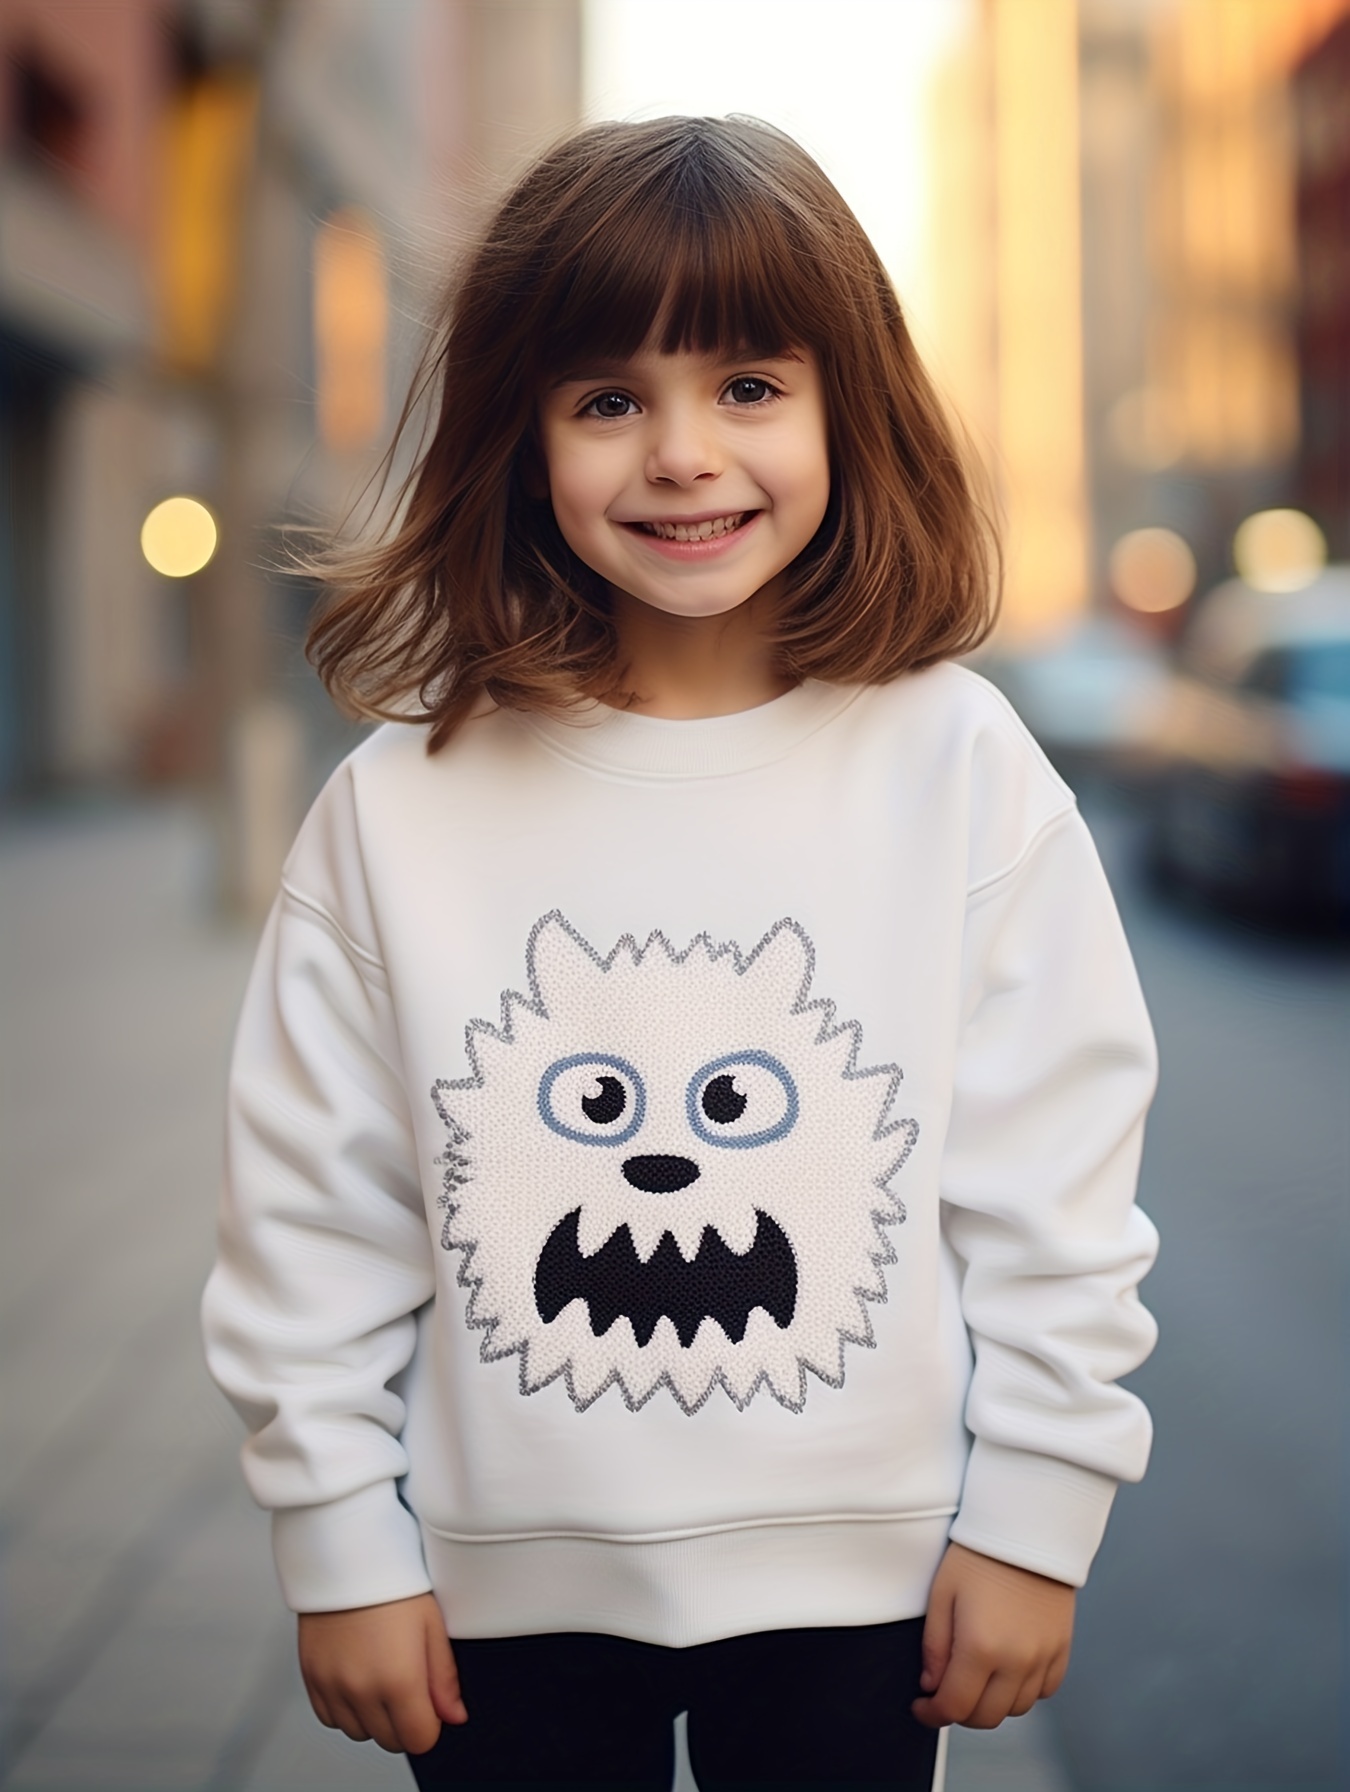 Winter Cute Girls Print Long Sleeve Pullovers Sweater - White on